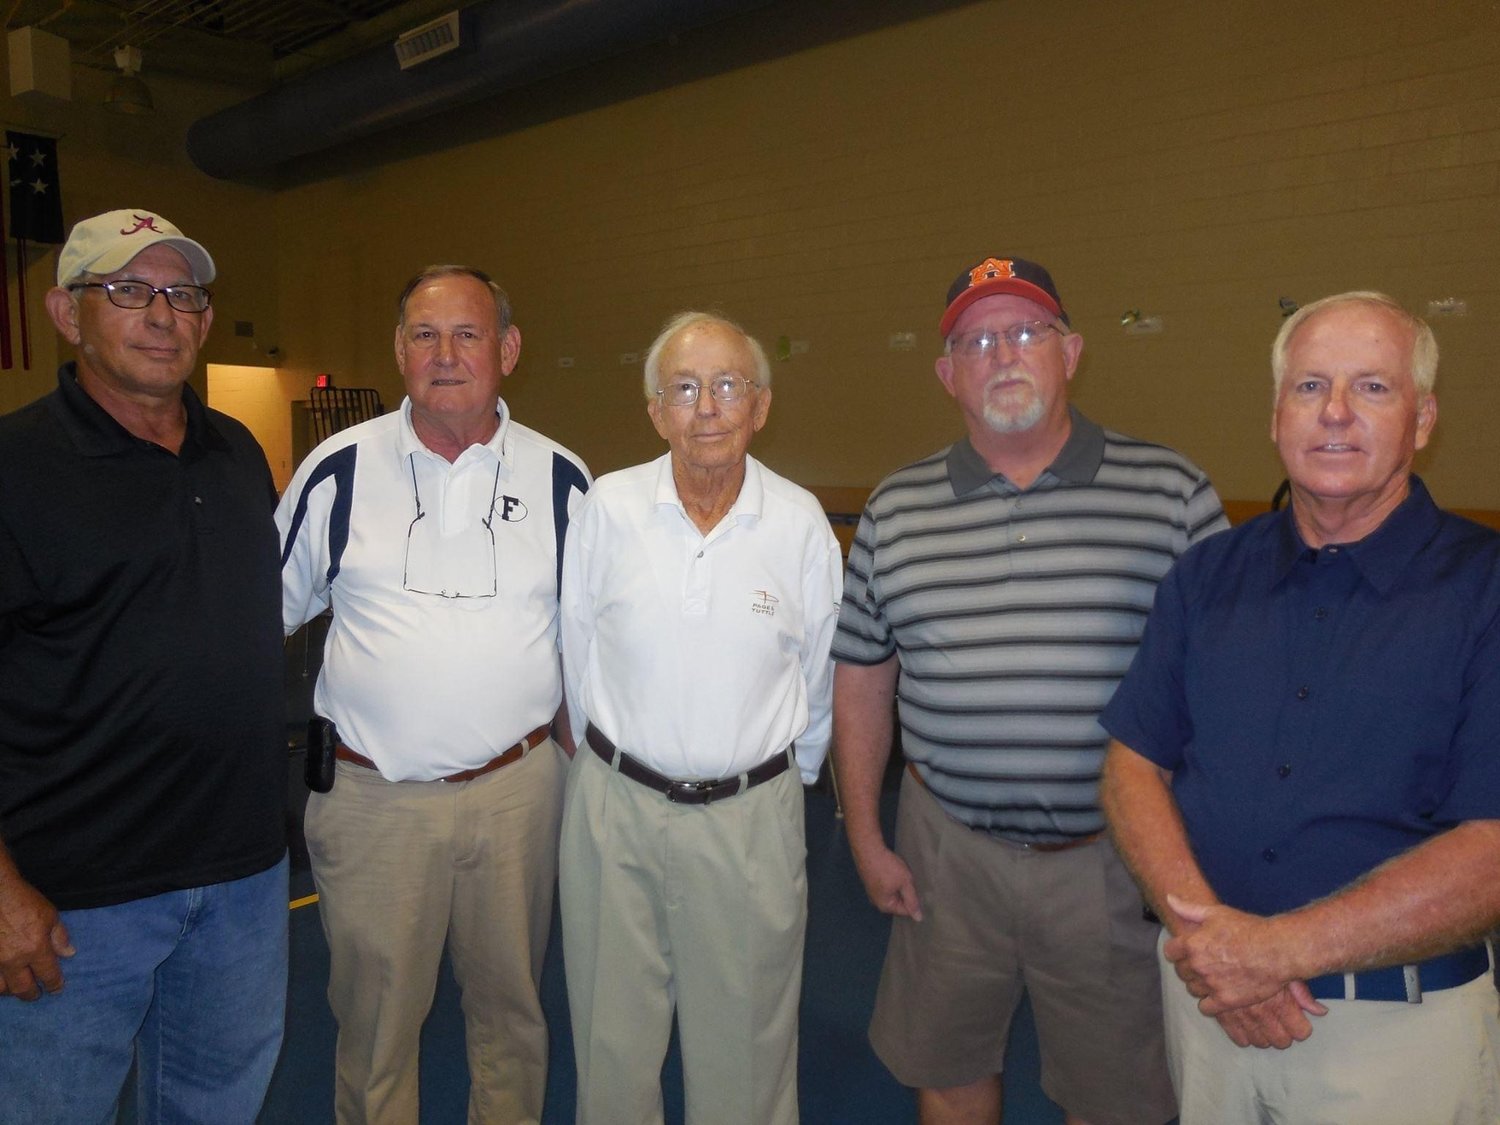 Coach Ivan Jones, flanked by players from the 1968 football team, from left, Savelle Rasbury, Denny Price, Jones, Alan Blackwell and Mike Smith.